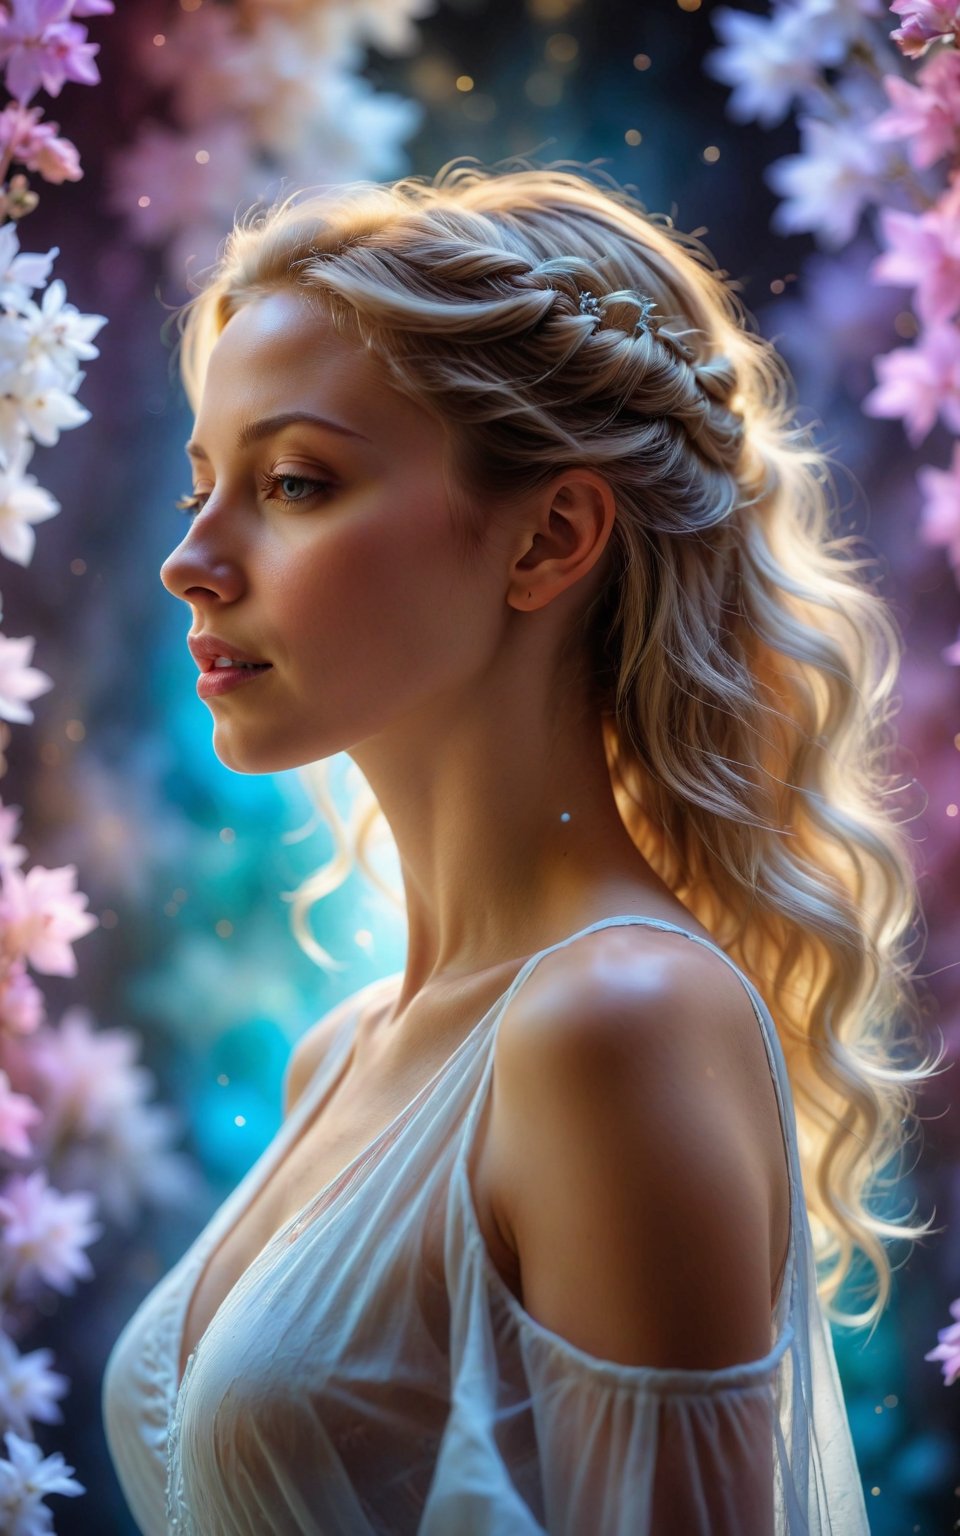 (best quality, 4K, 8K, high-resolution, masterpiece), ultra-detailed, photorealistic, glowing white silhouette of woman, ethereal colored background, soft lighting, dreamy atmosphere, digital art, artistic composition, high contrast.